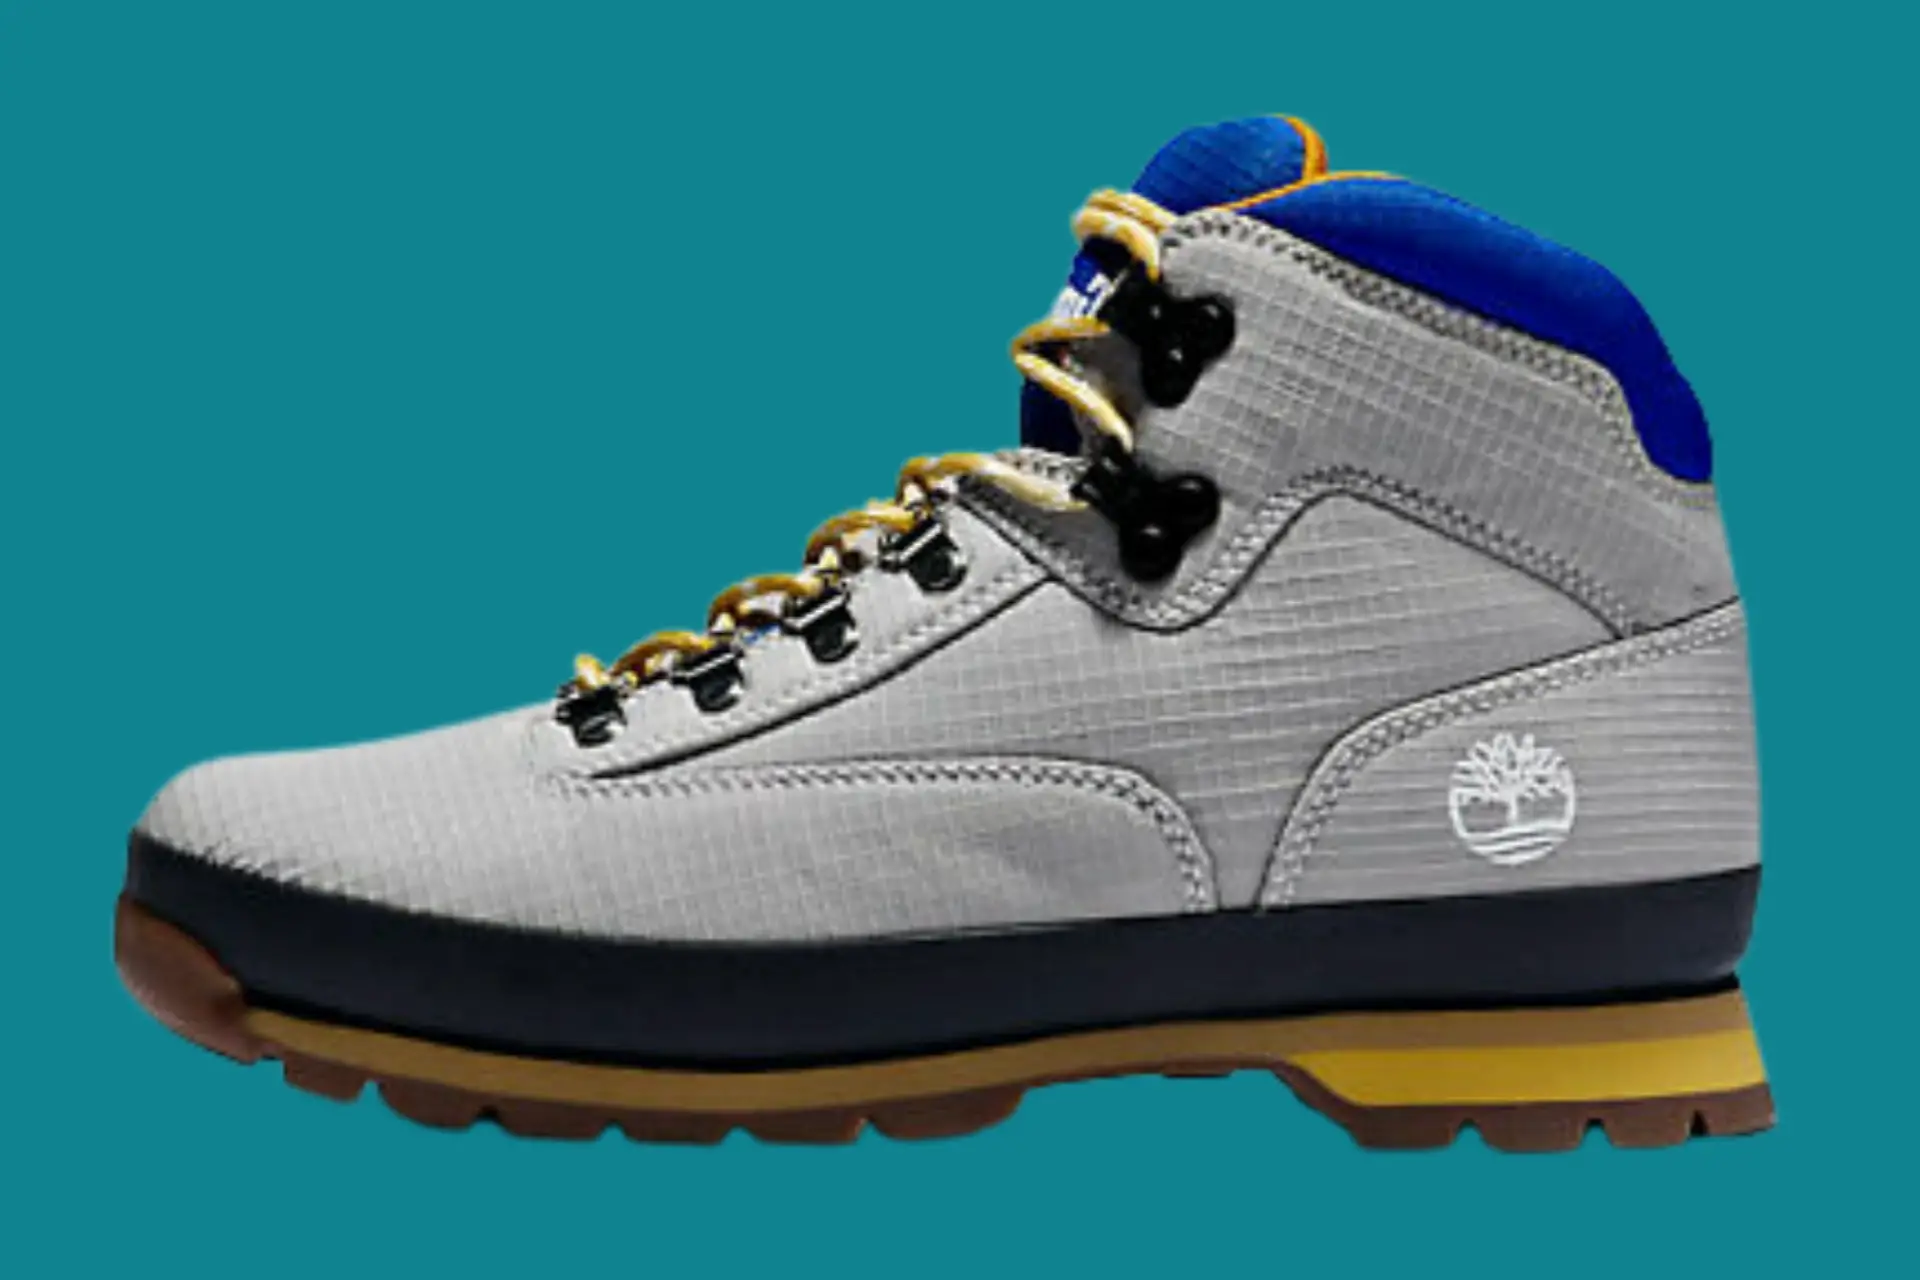 Best Timberland hiking boots